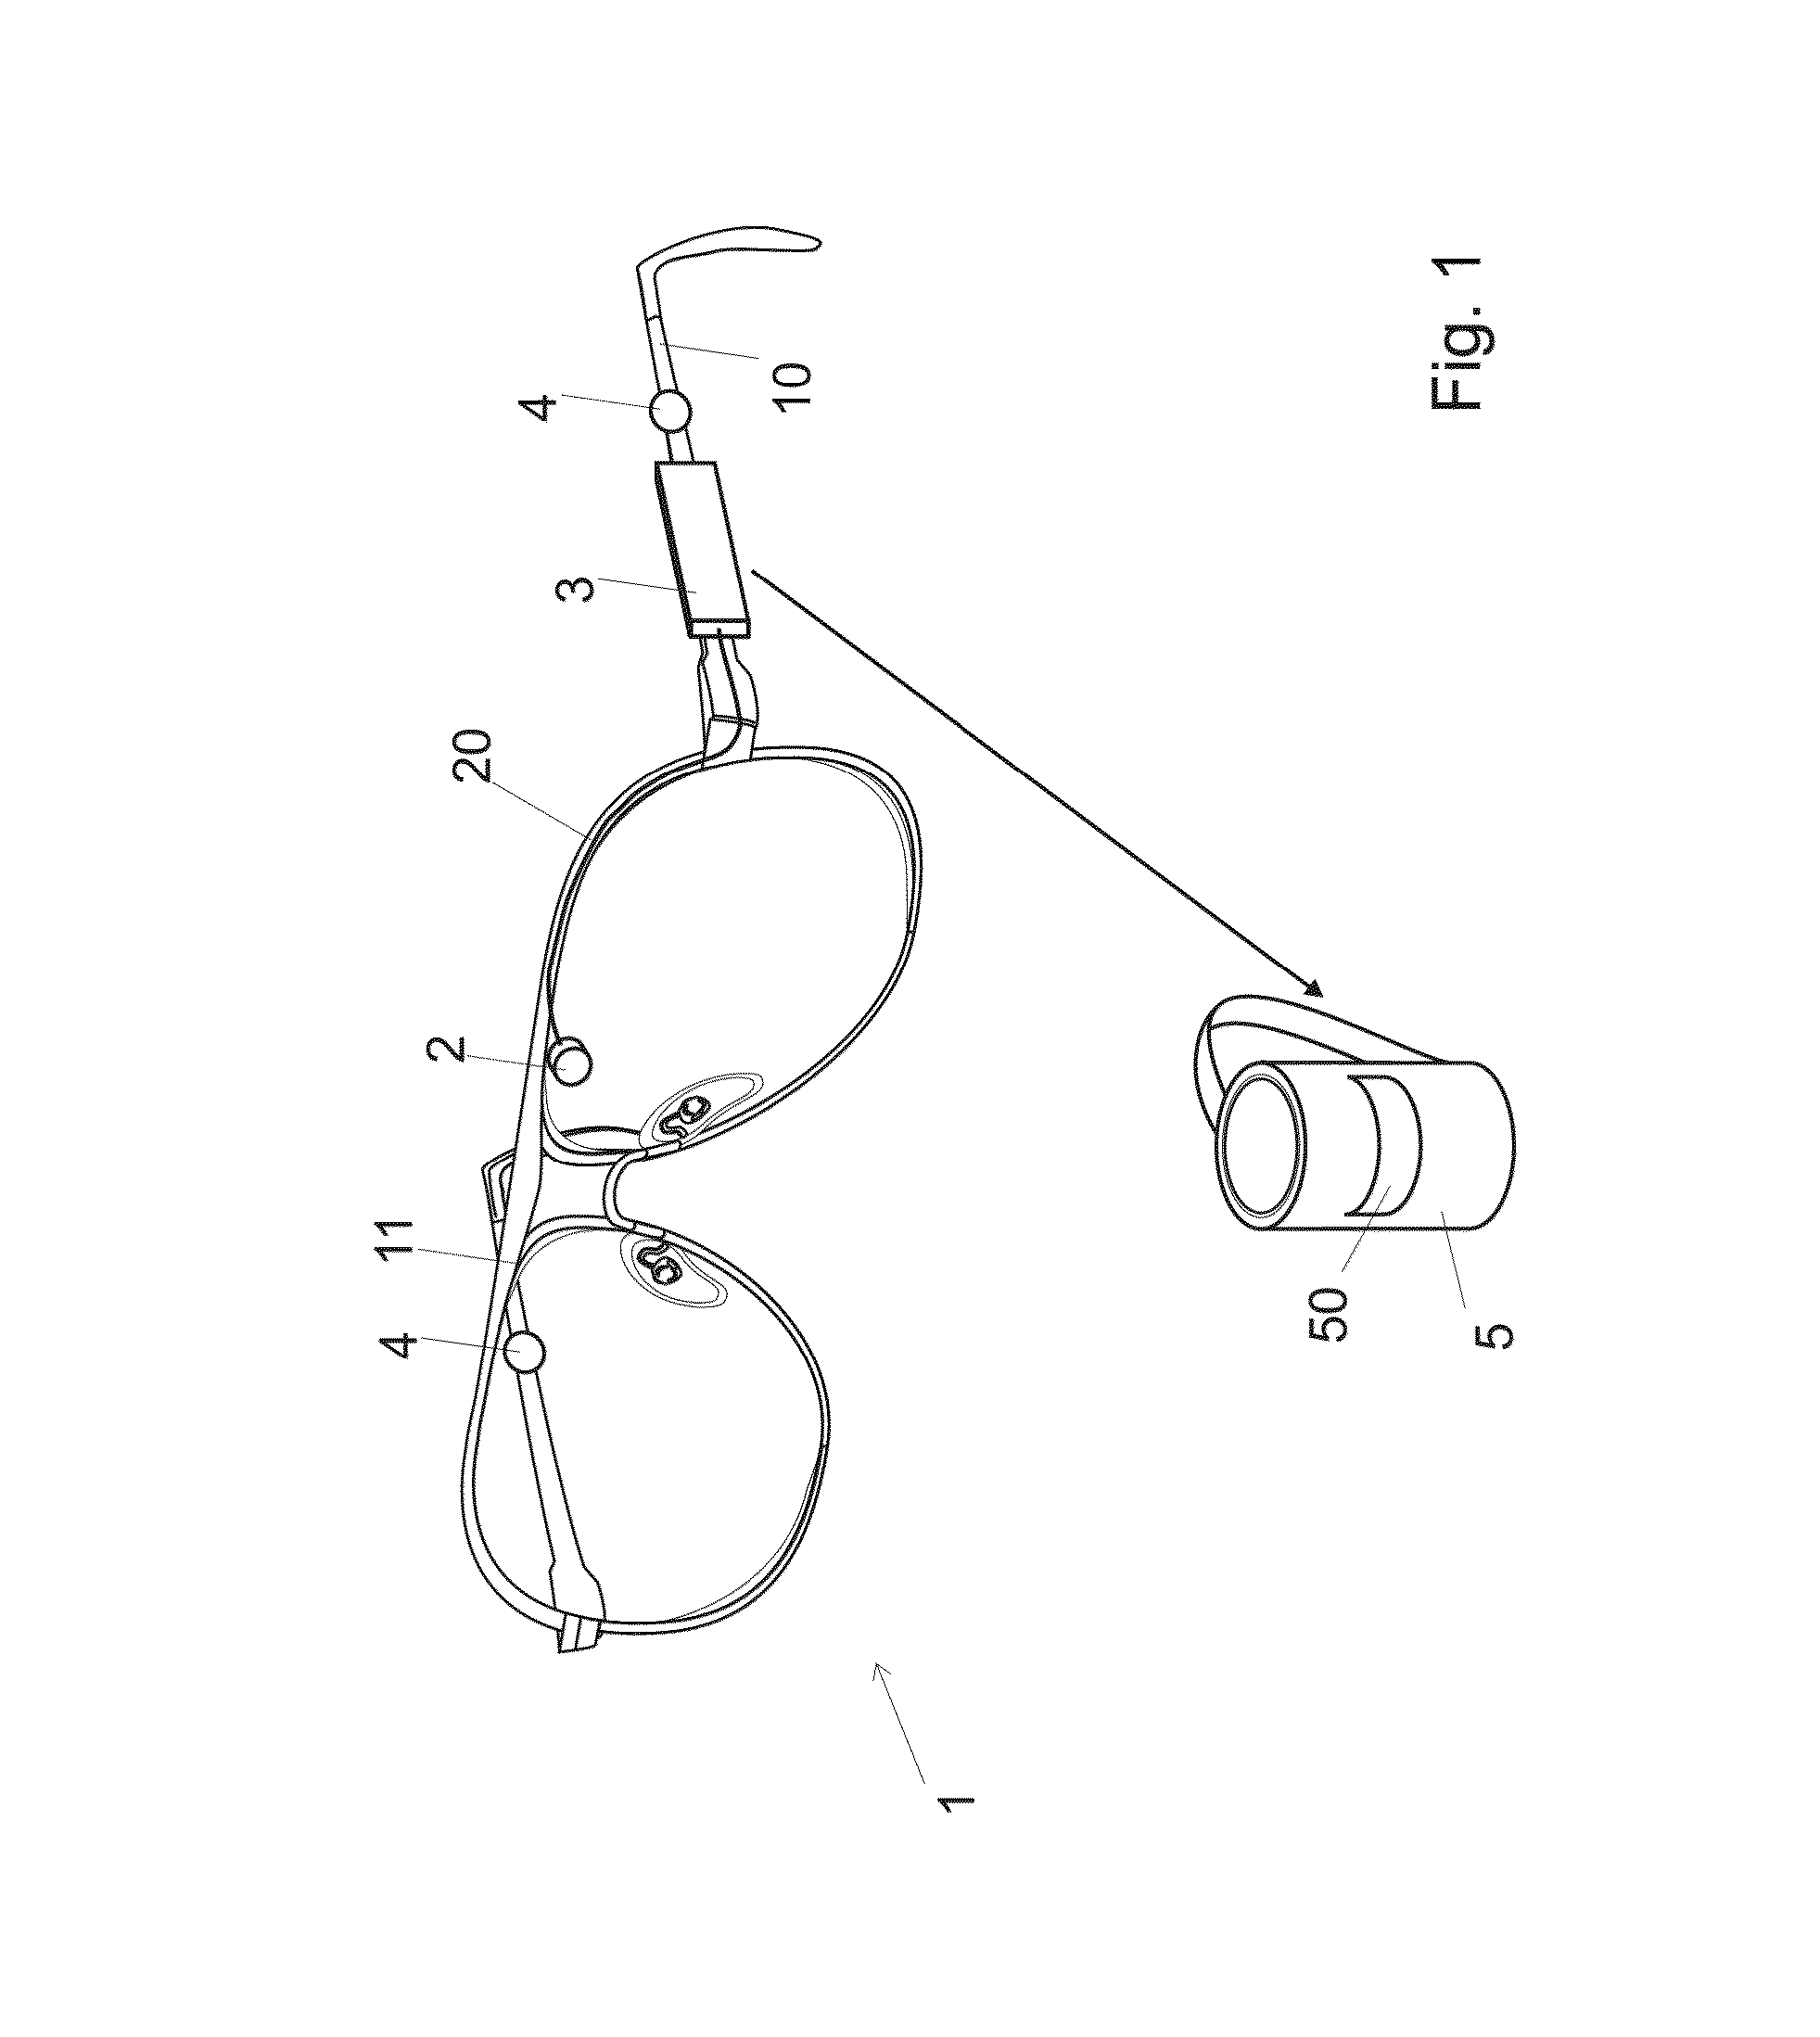 Retinal display projection device